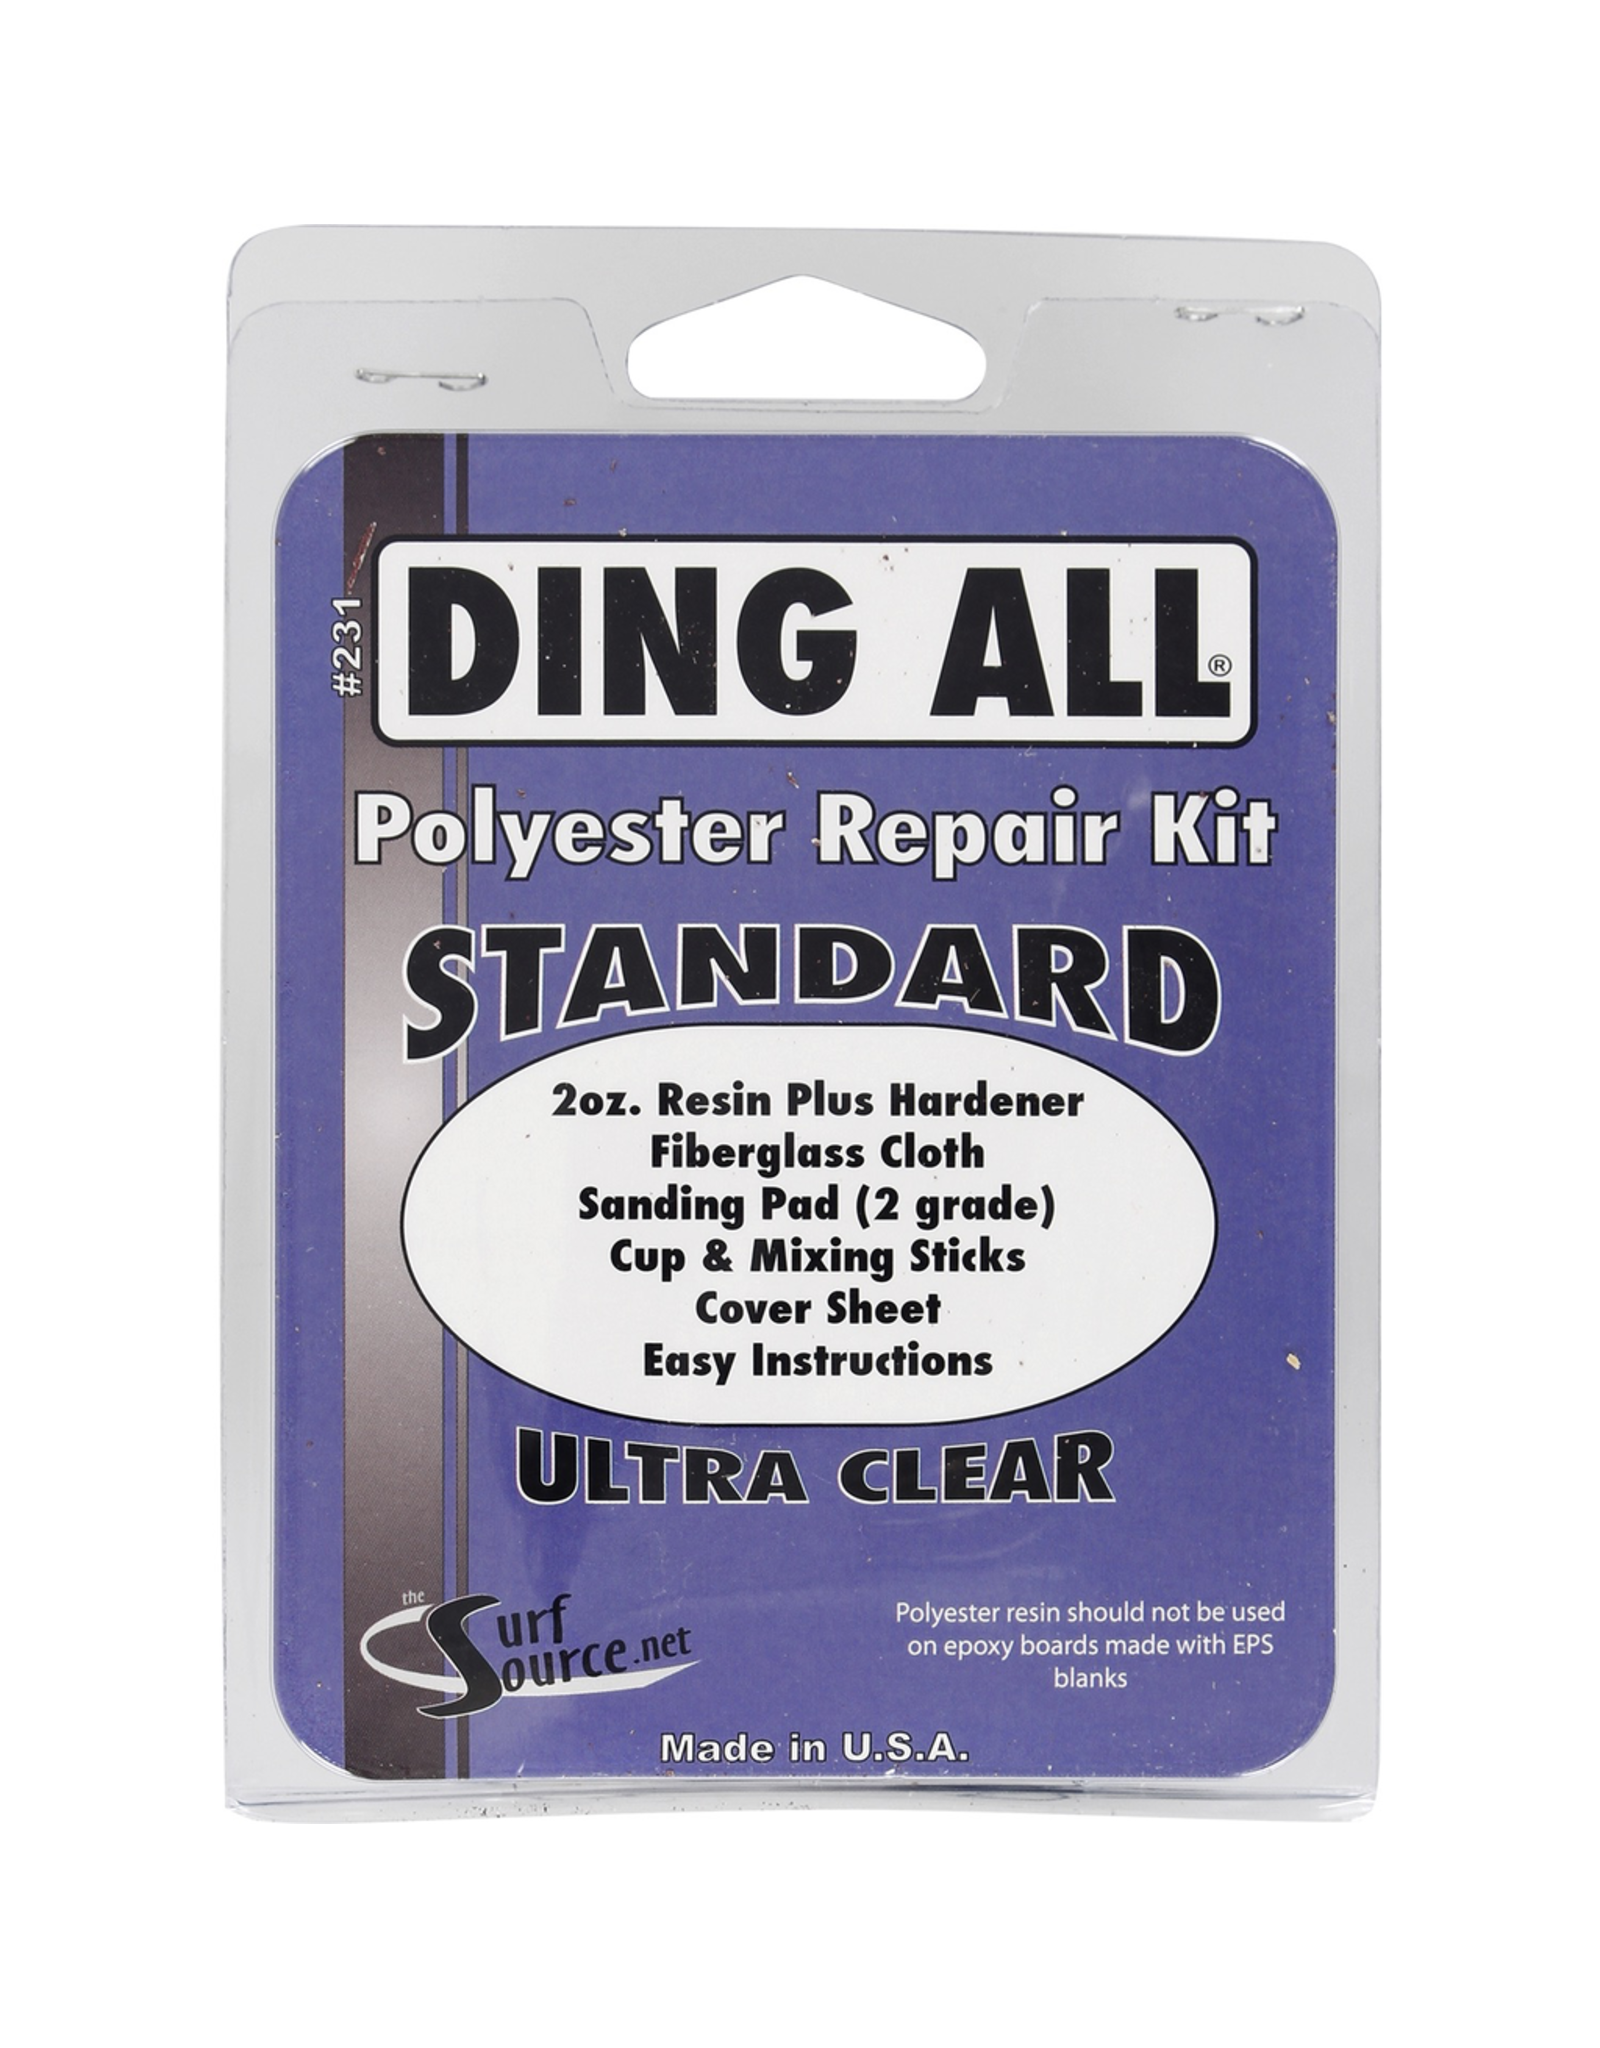 DING ALL POLYESTER STANDARD EPOXY REPAIR KIT